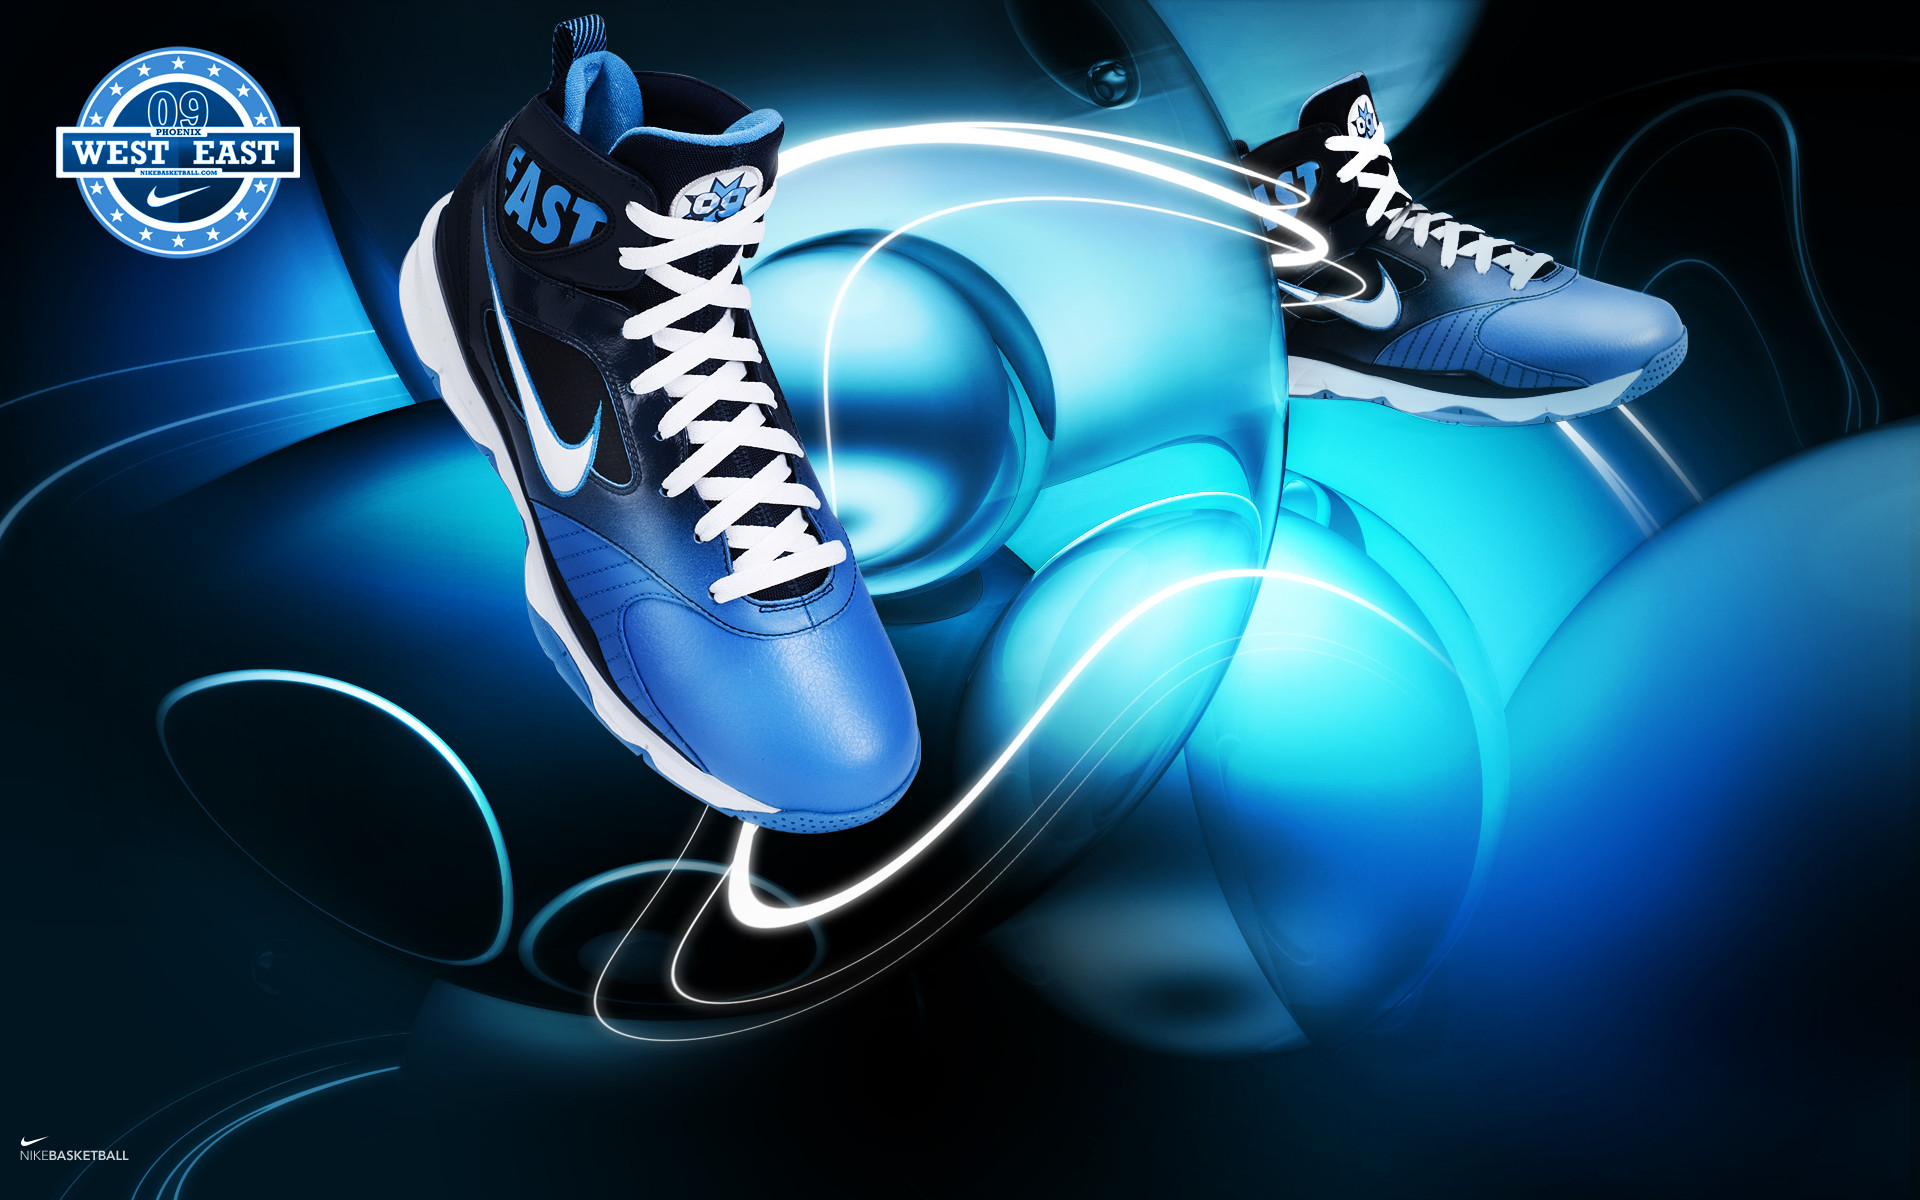 Hd Wallpapers Nike Shoes 1200 X 700 1016 Kb Png | HD Wallpapers – 100%